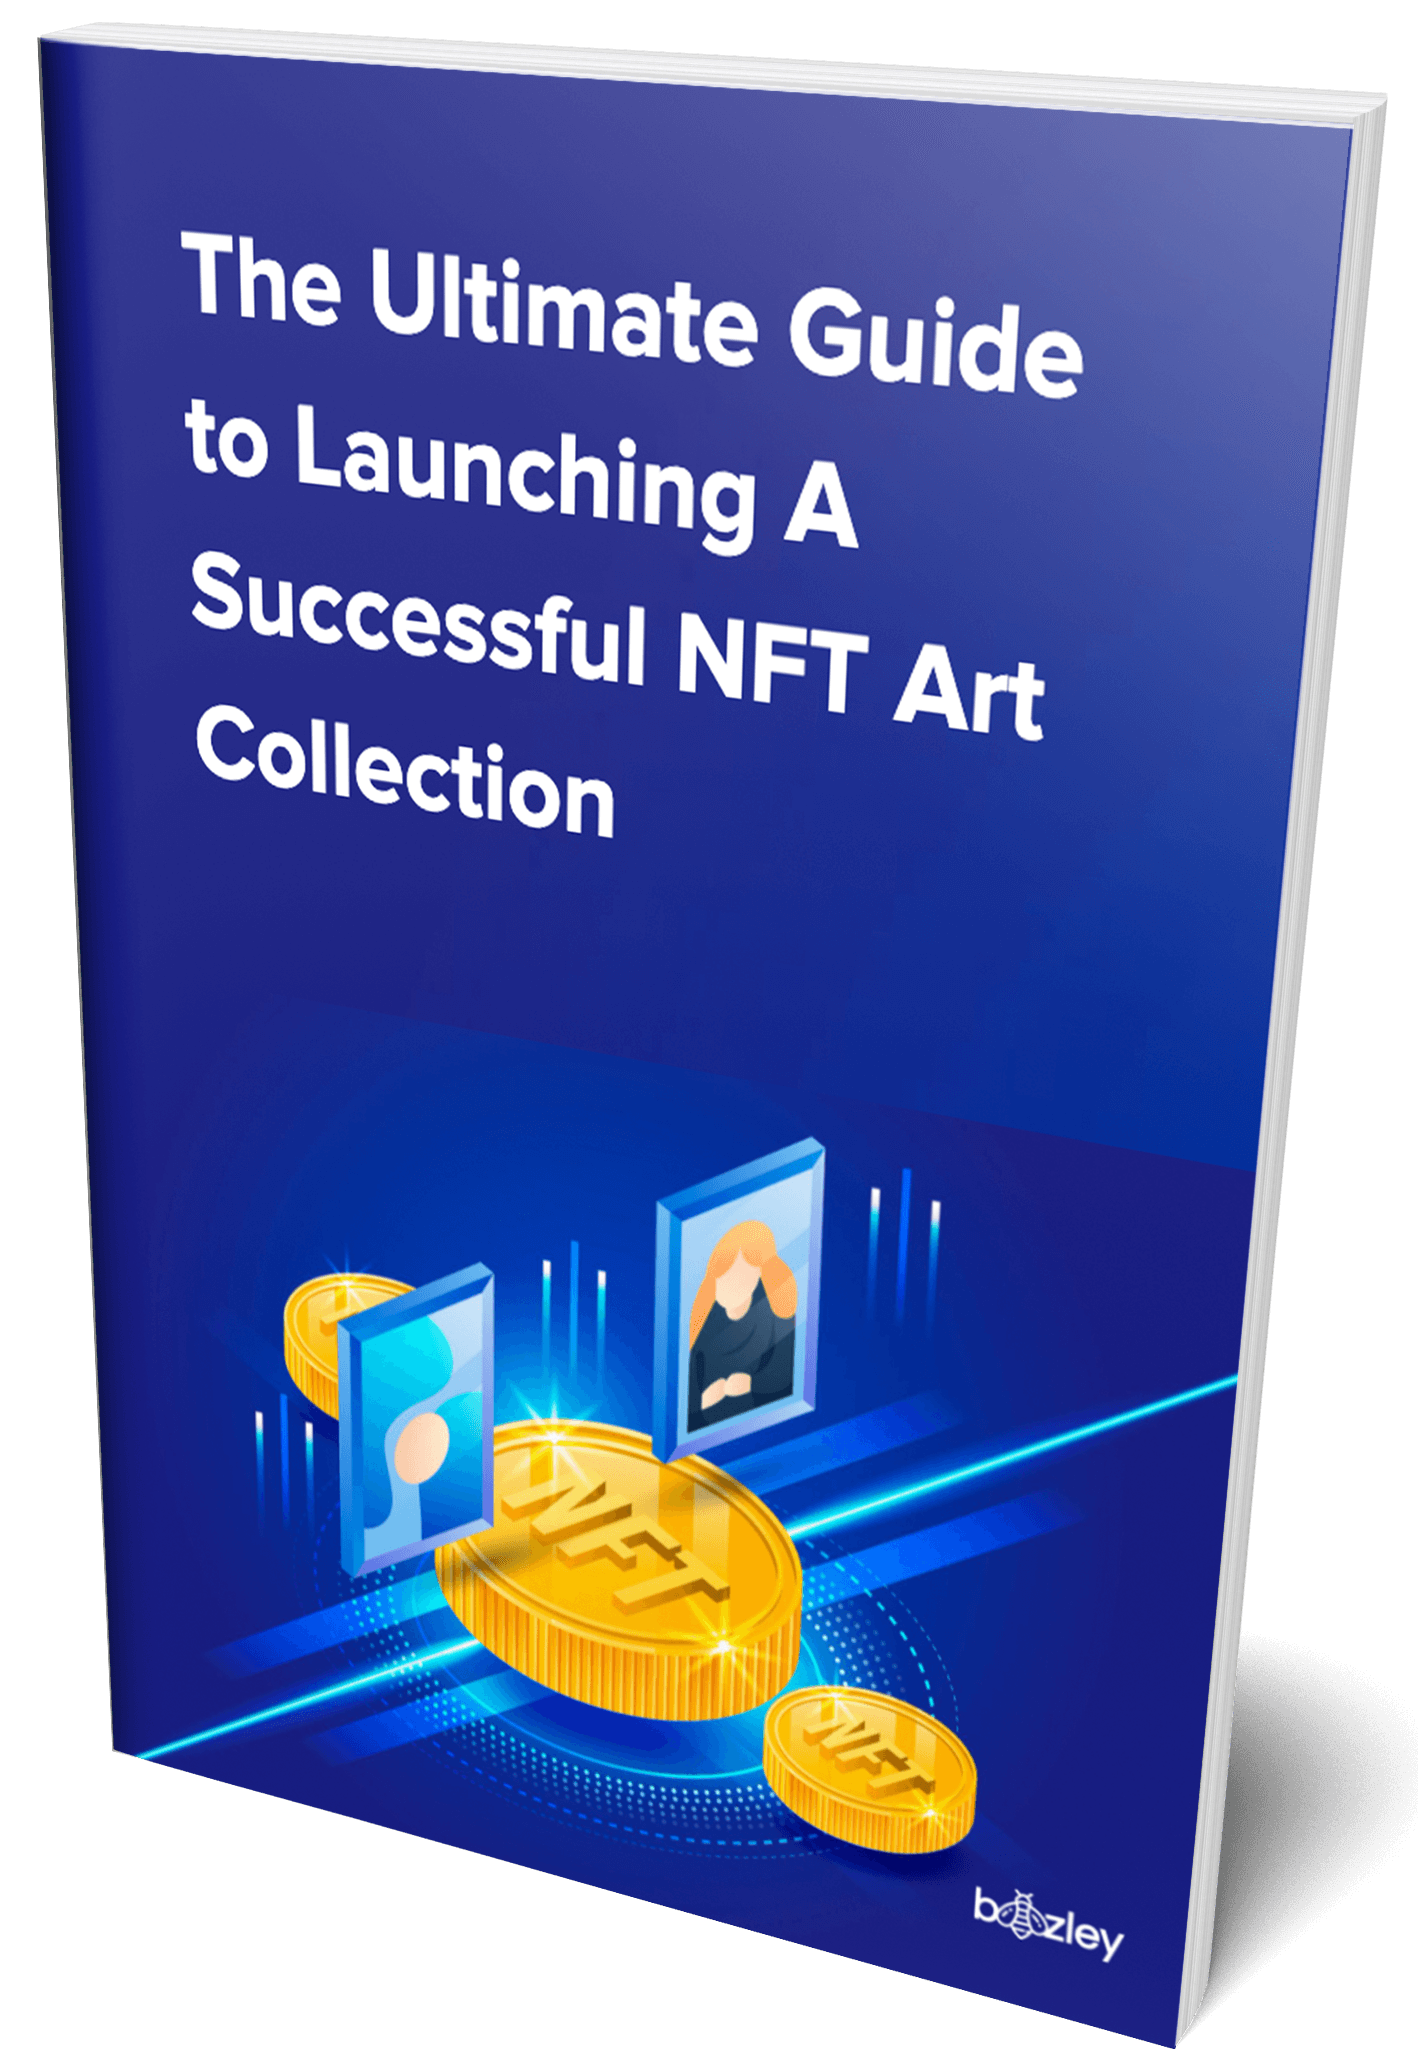 The Ultimate Guide to Launching A Successful NFT Art Collection